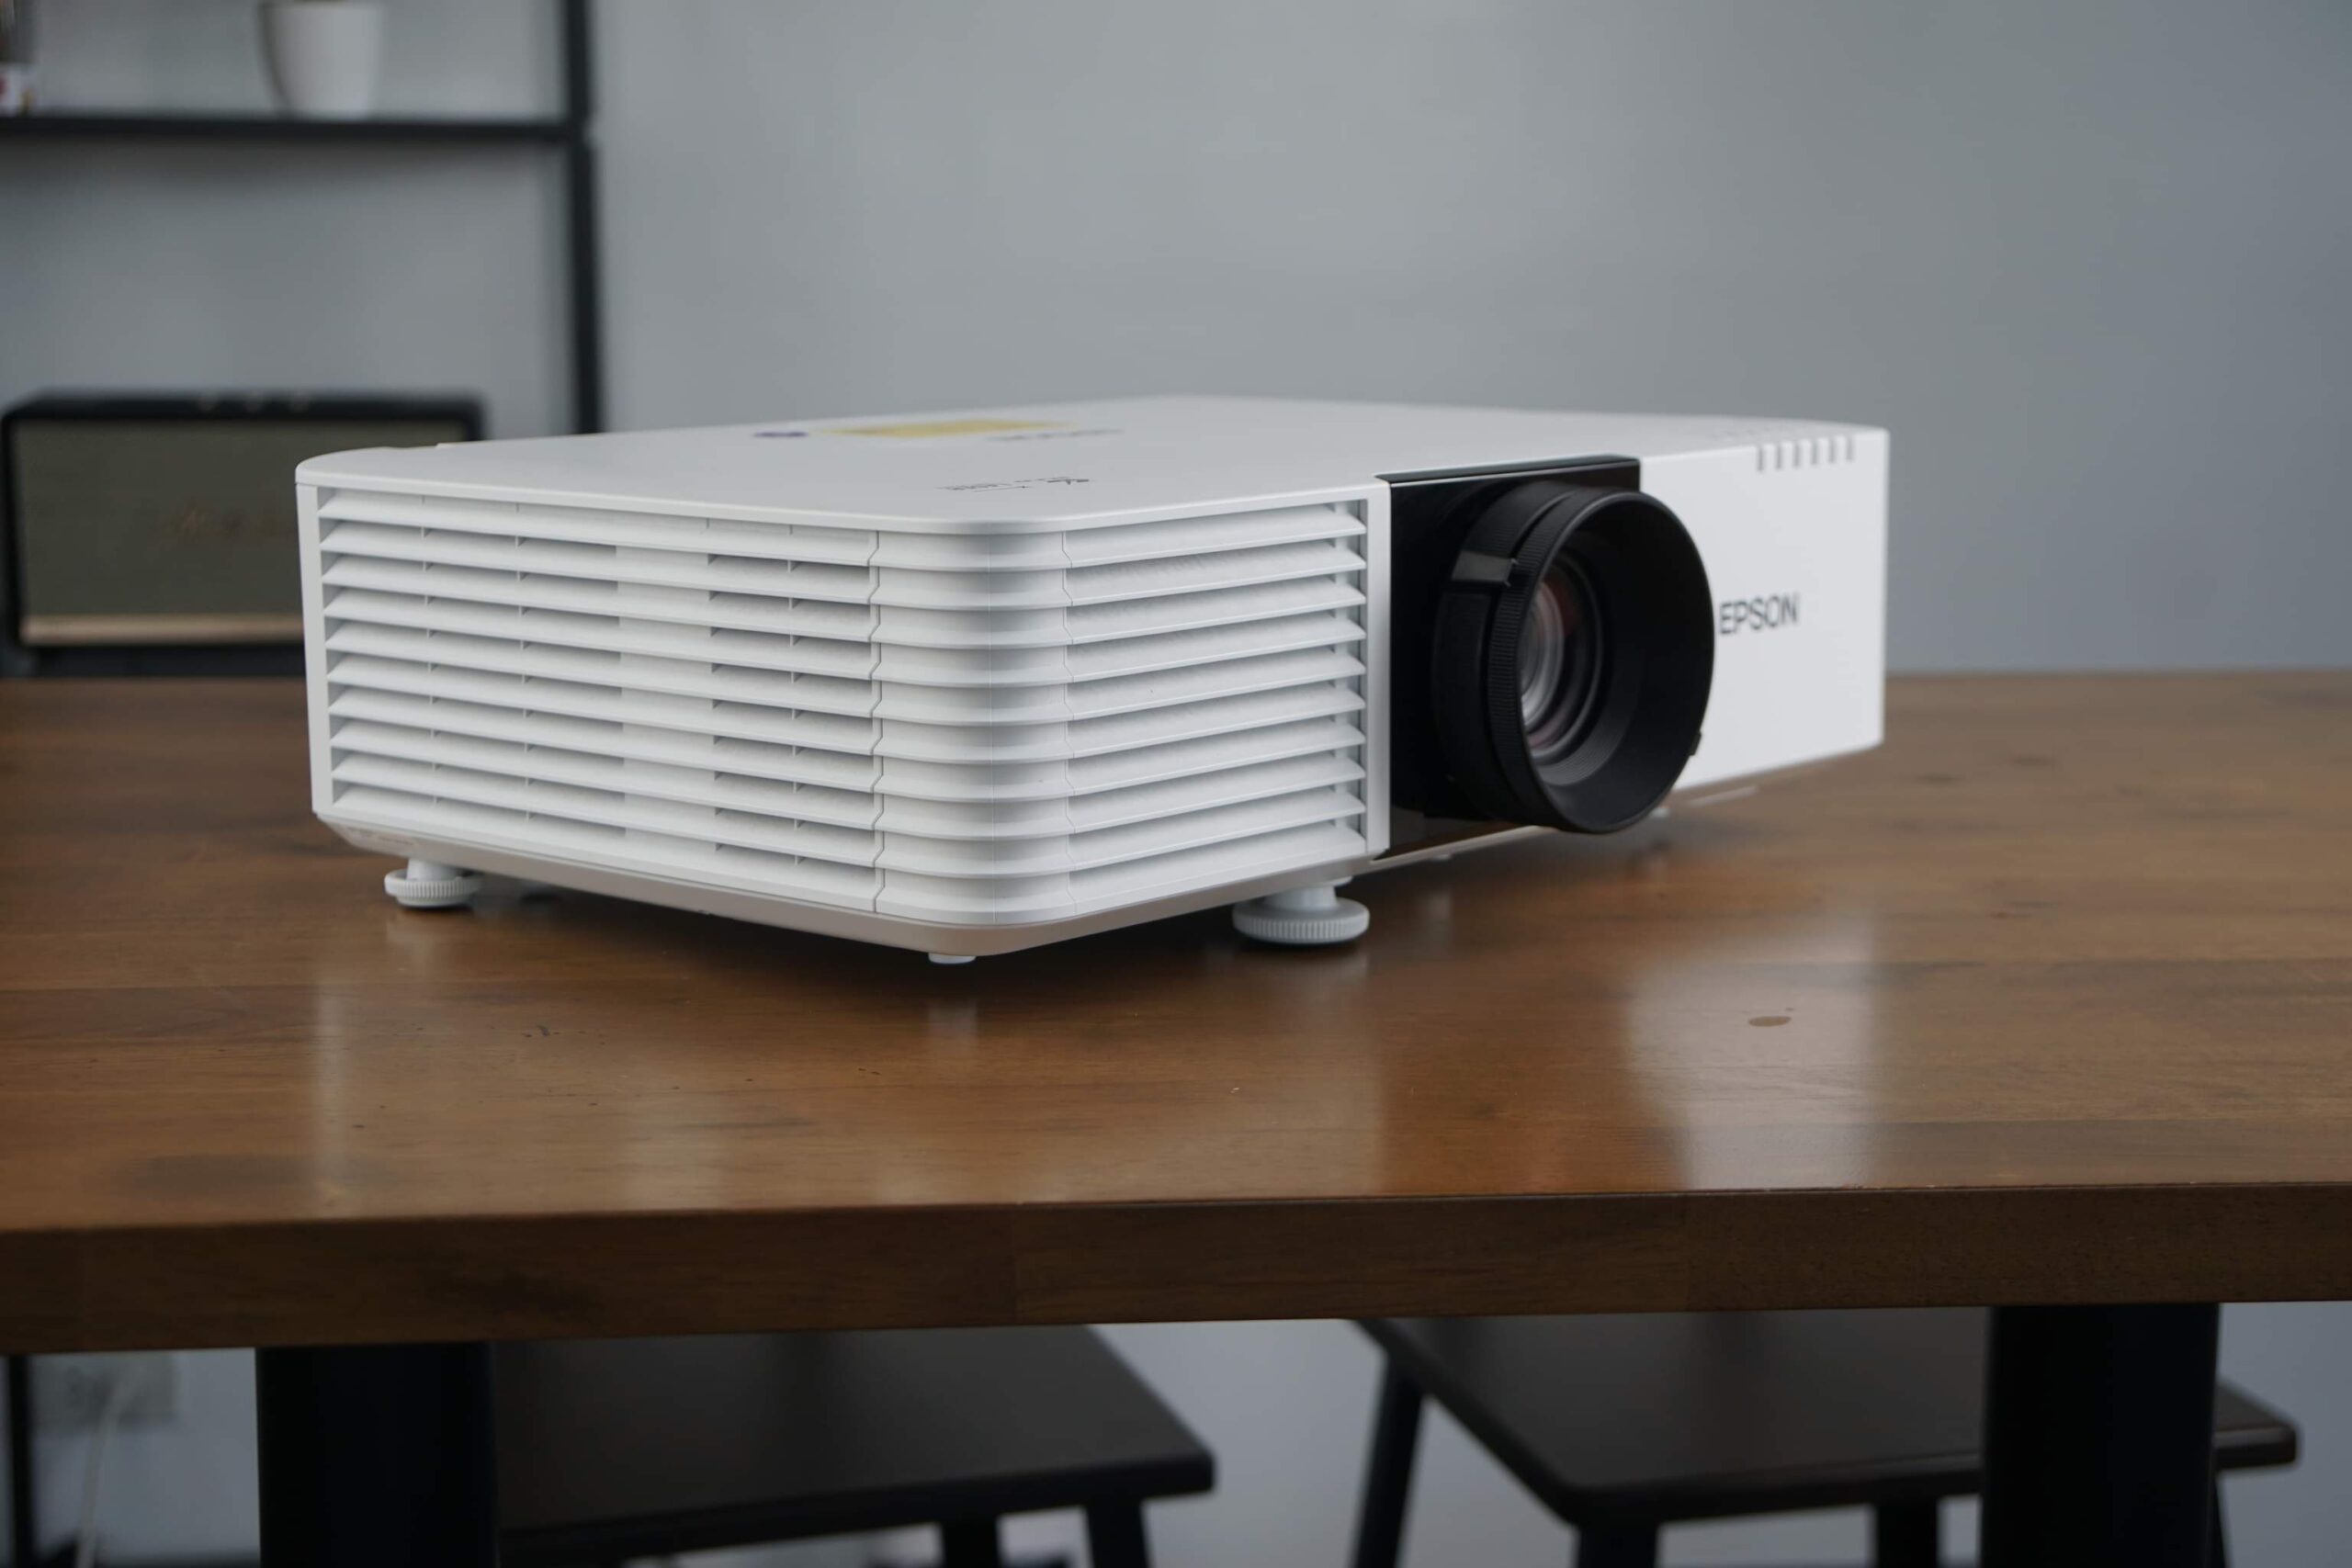 Epson EB-L520U Projector: Compact and Easy to Use